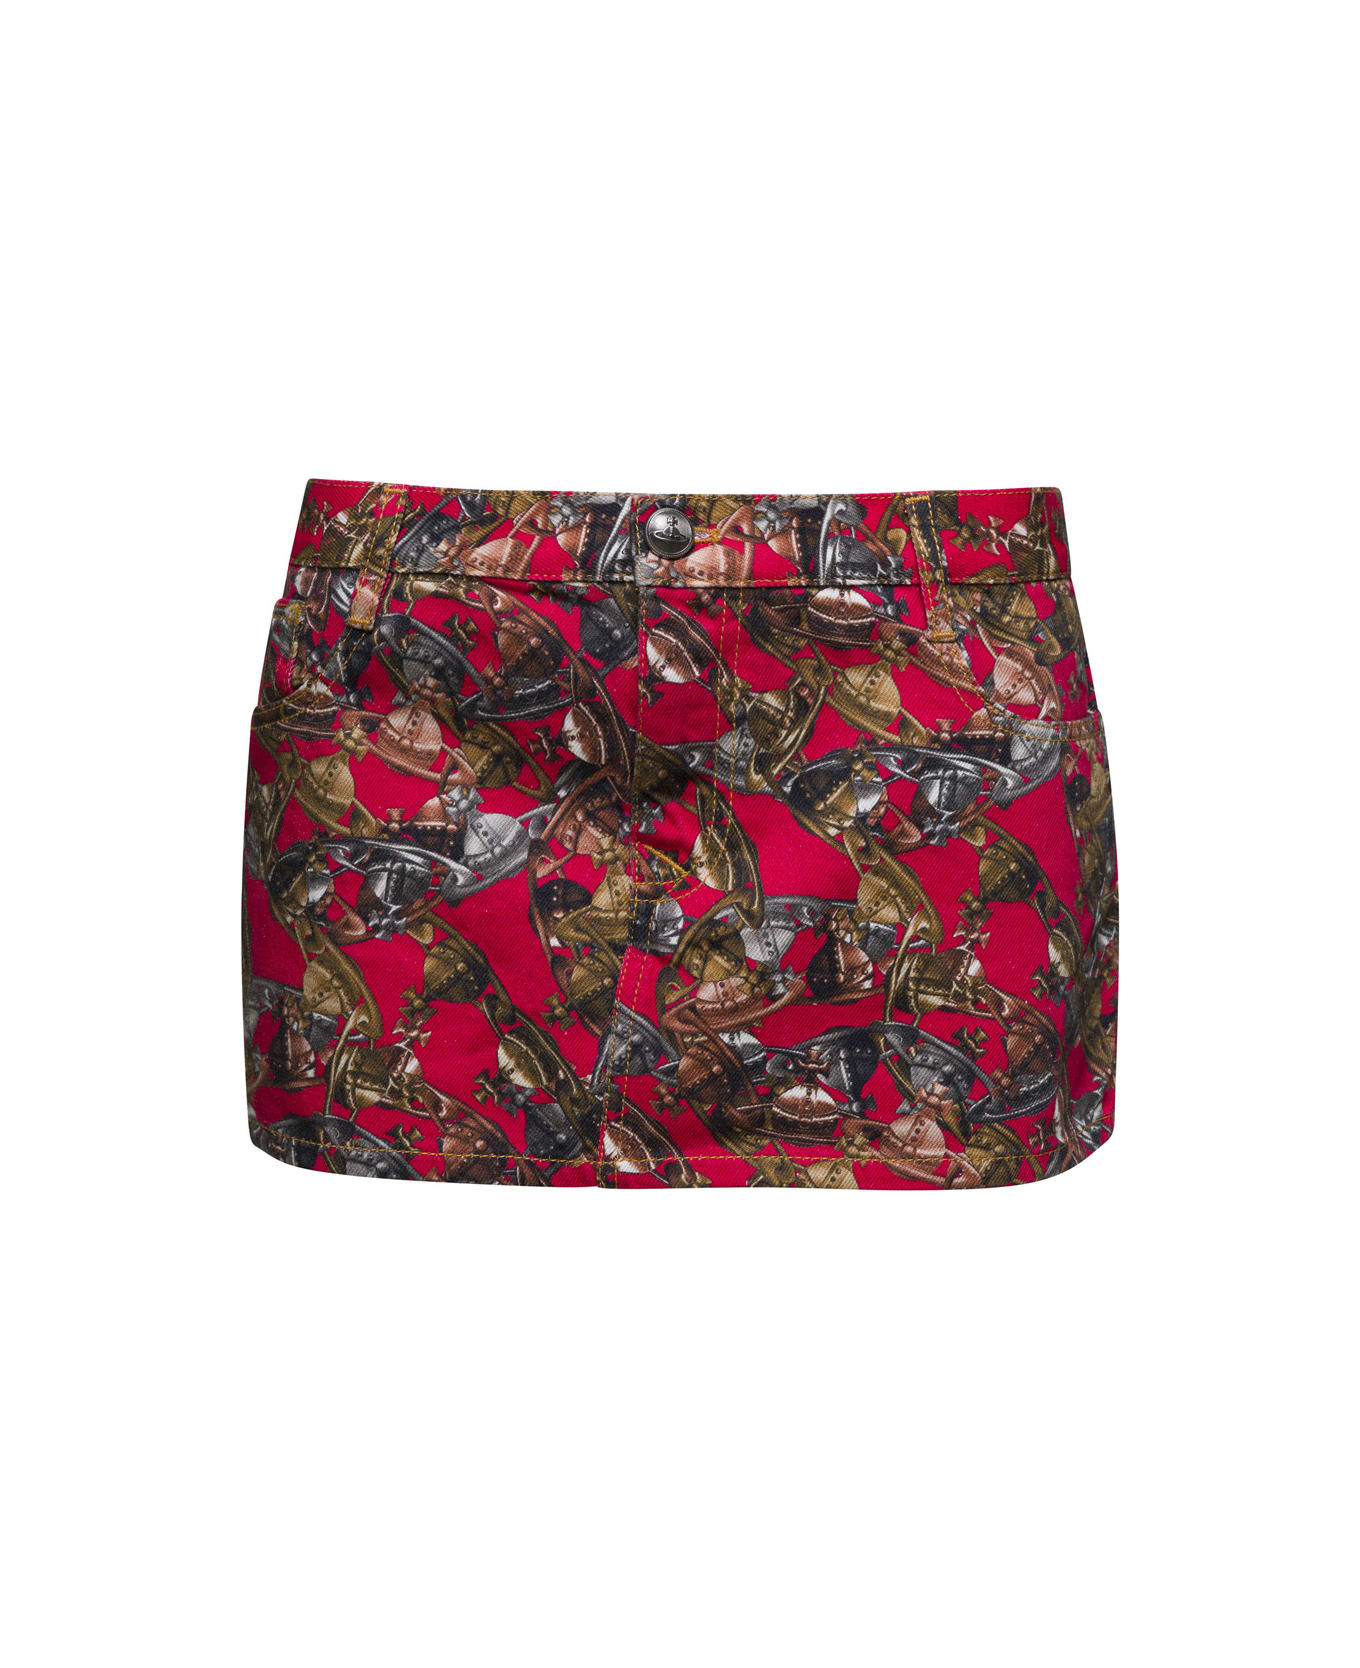 Vivienne Westwood Red Printed Mini Skirt In Cotton Woman - Red